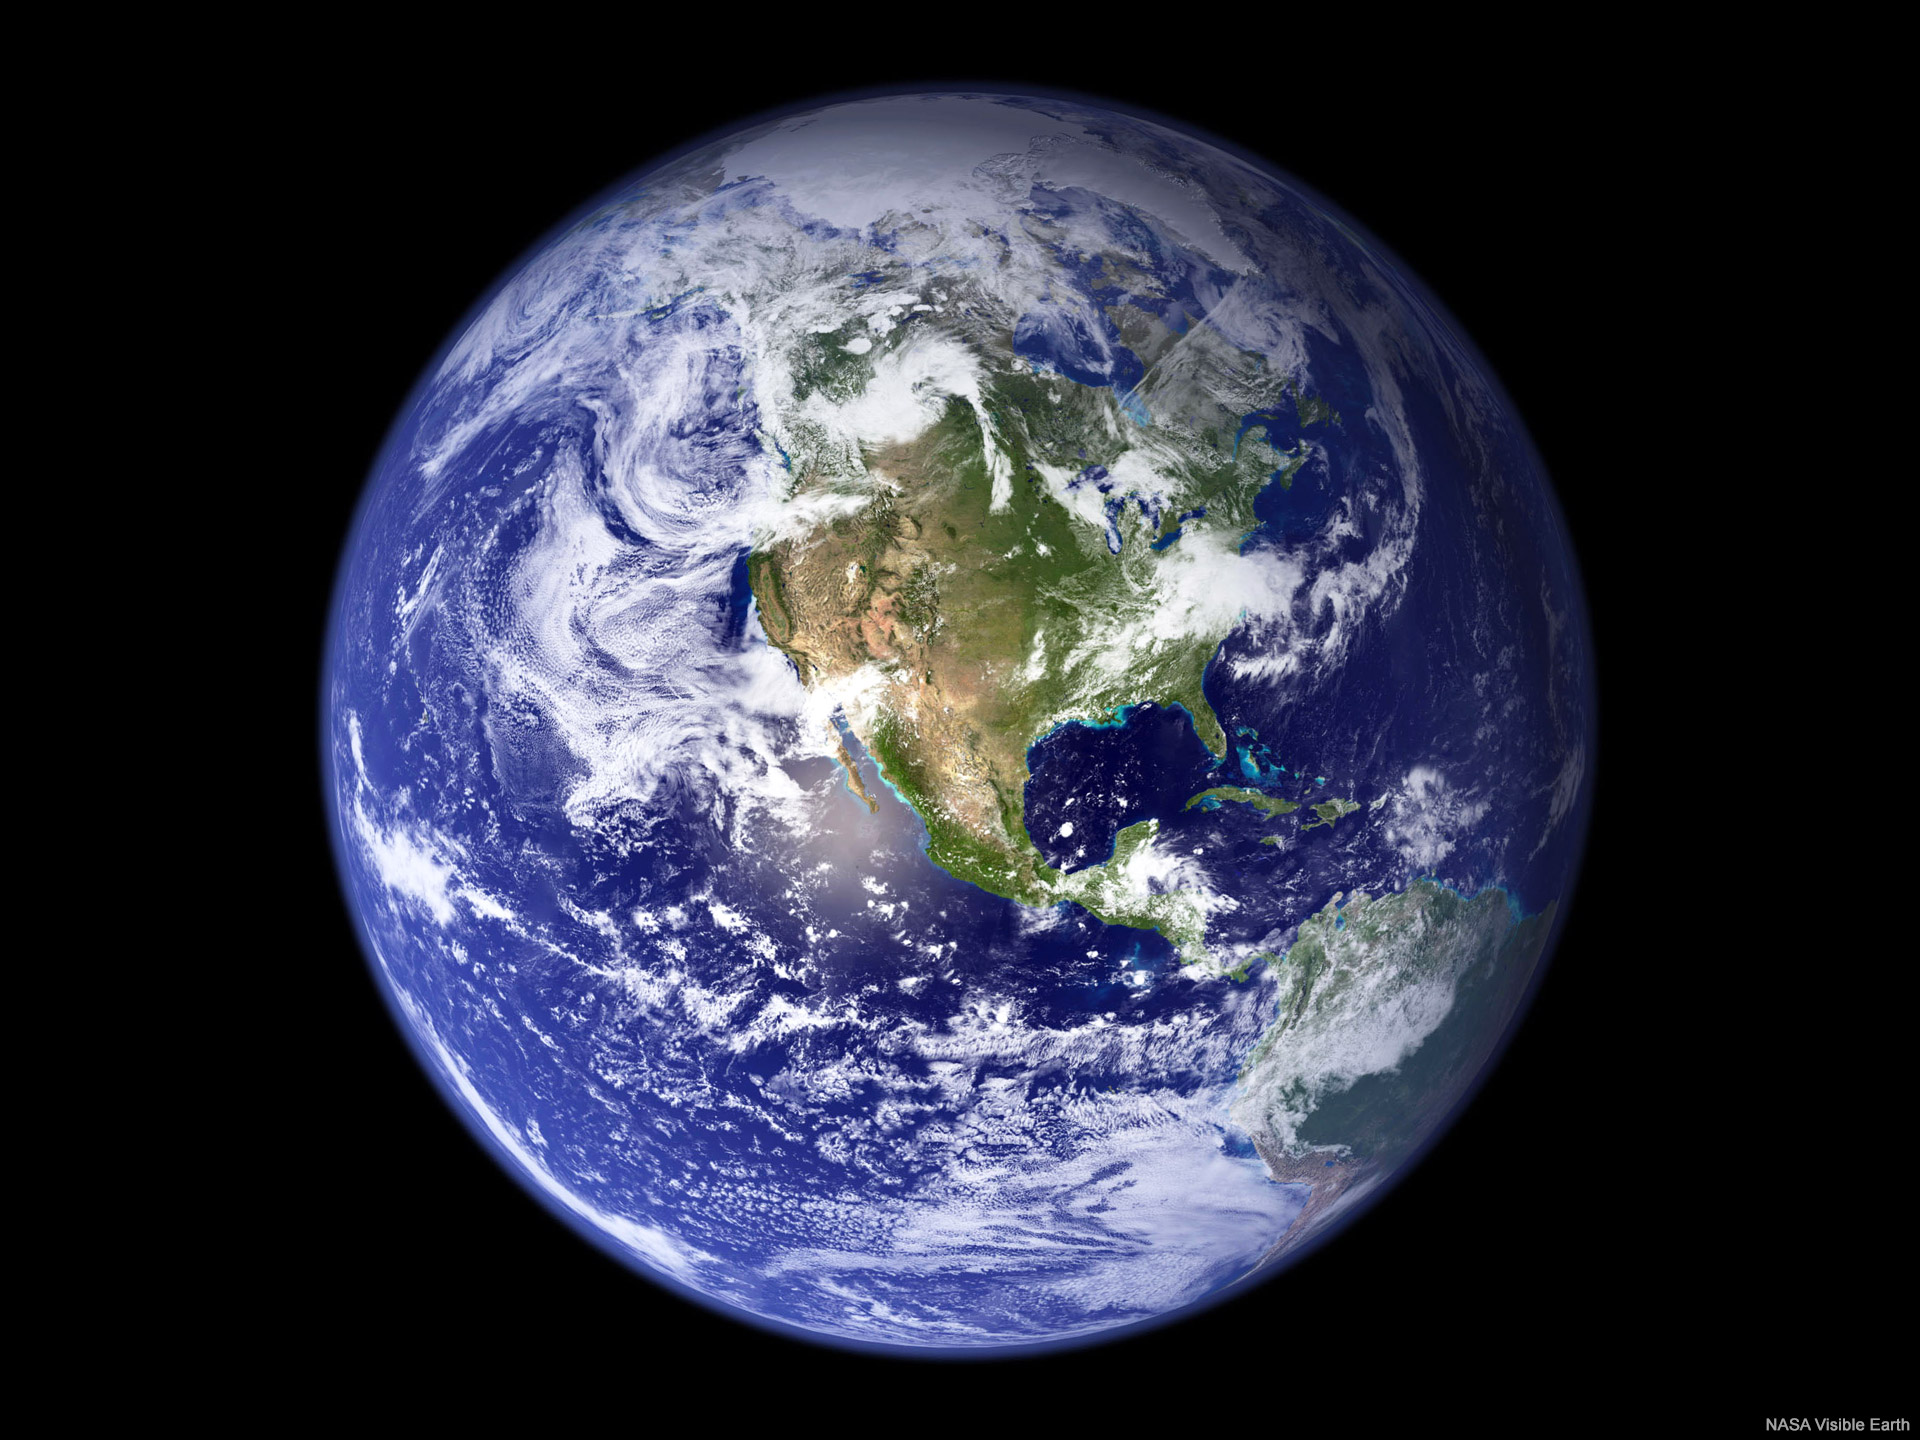 Blue Marble Background